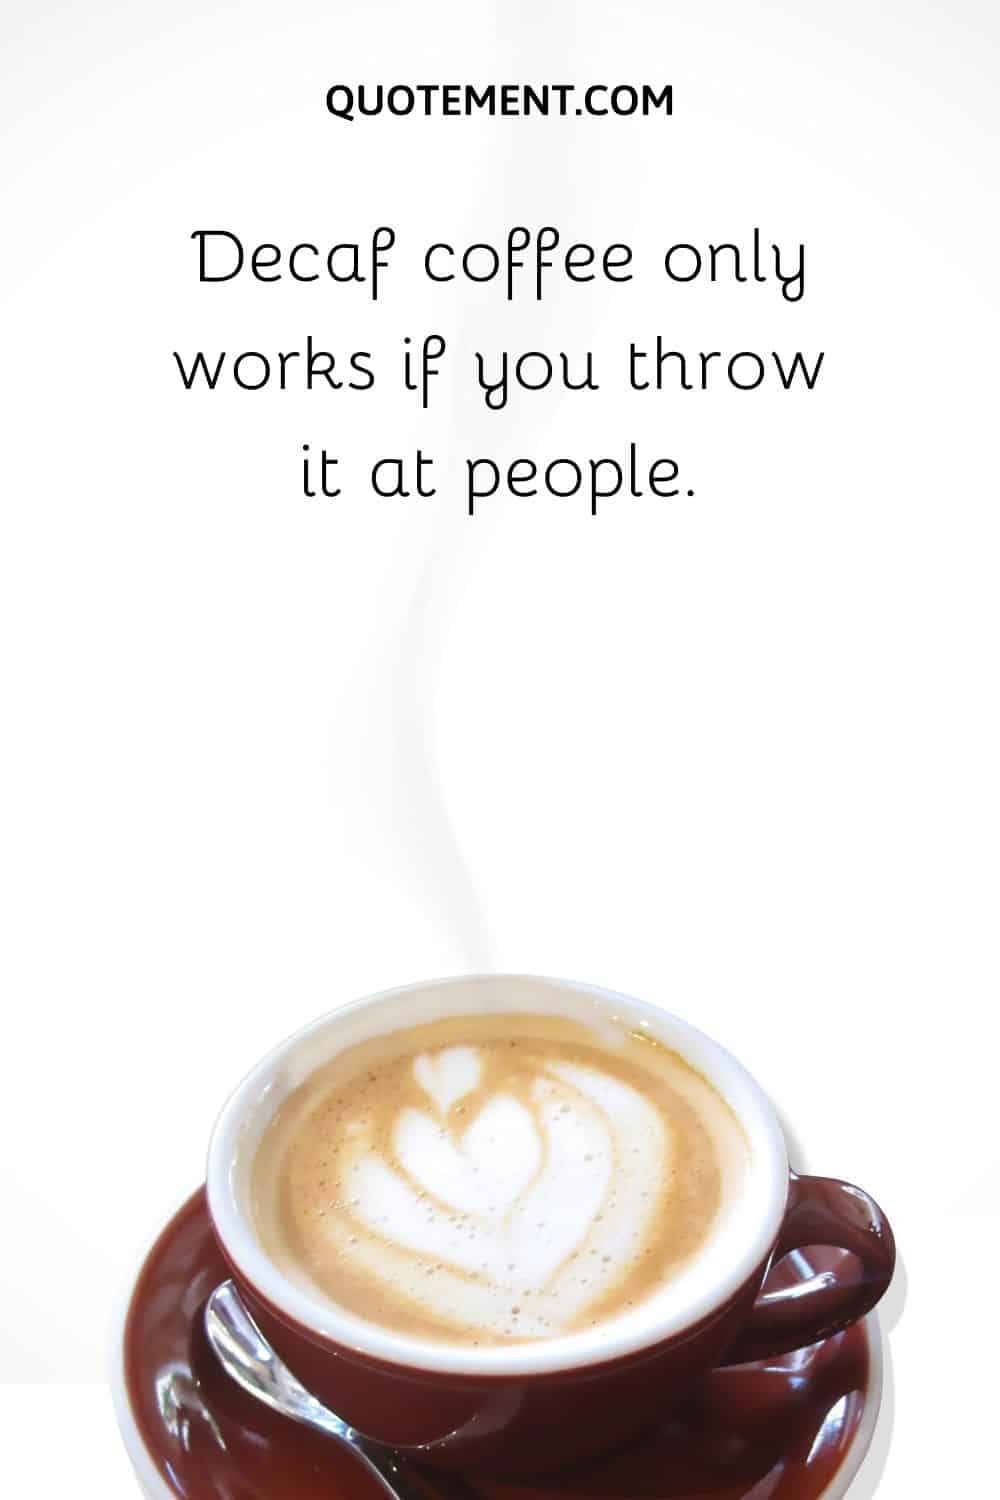 Decaf coffee only works if you throw it at people